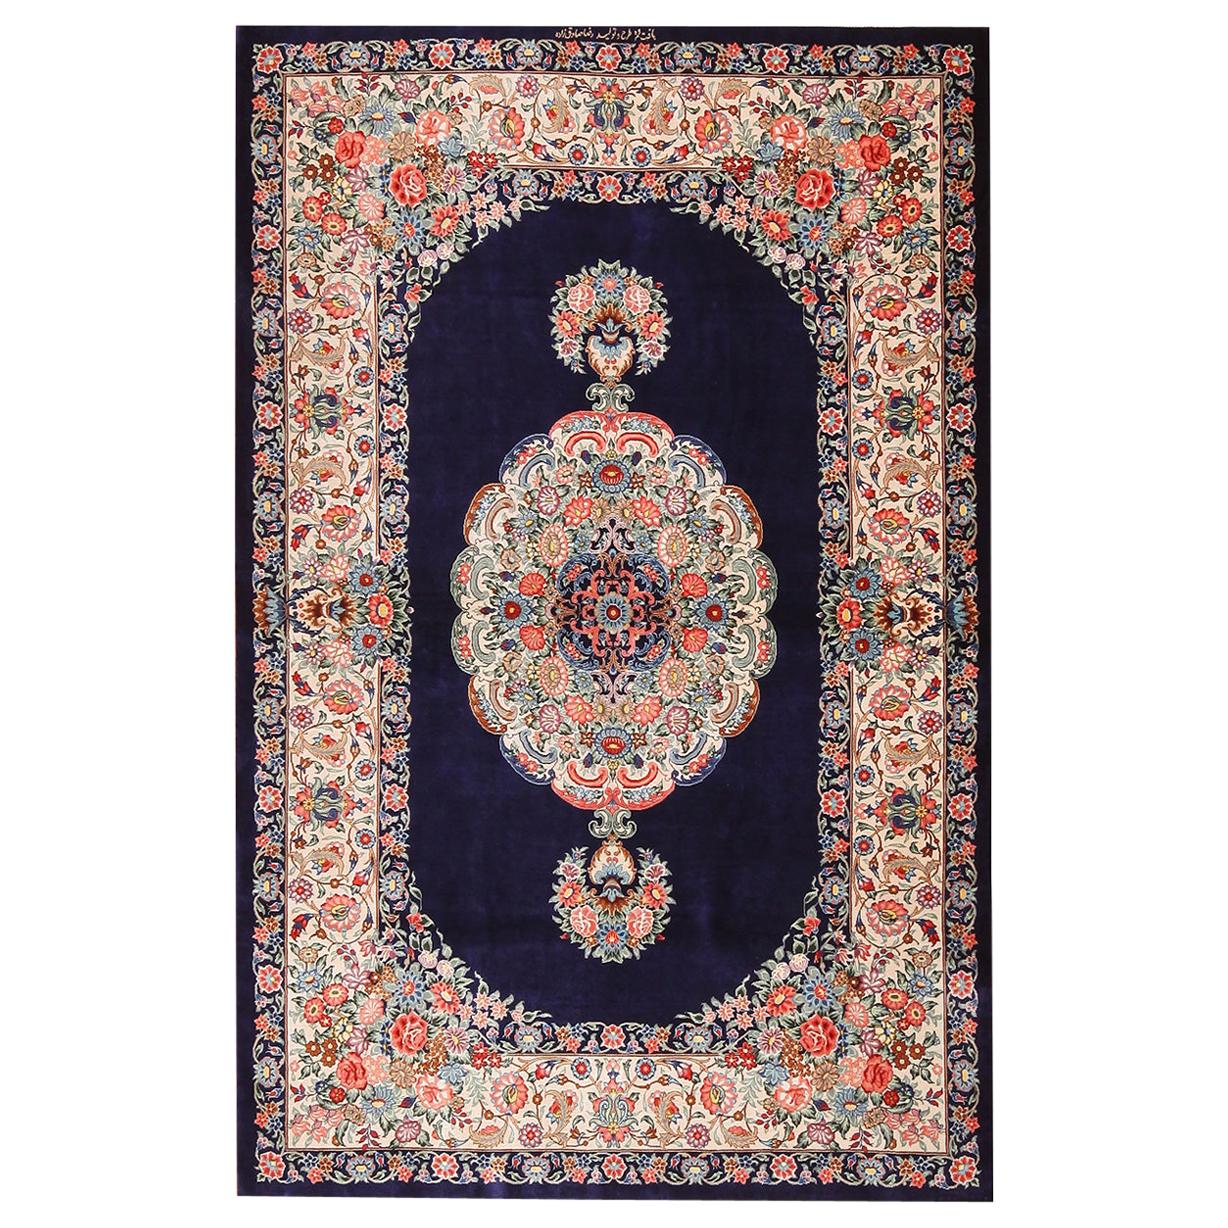 Nazmiyal Collection Vintage Persian Silk Qum Rug. 3 ft 4 in x 5 ft 2 in